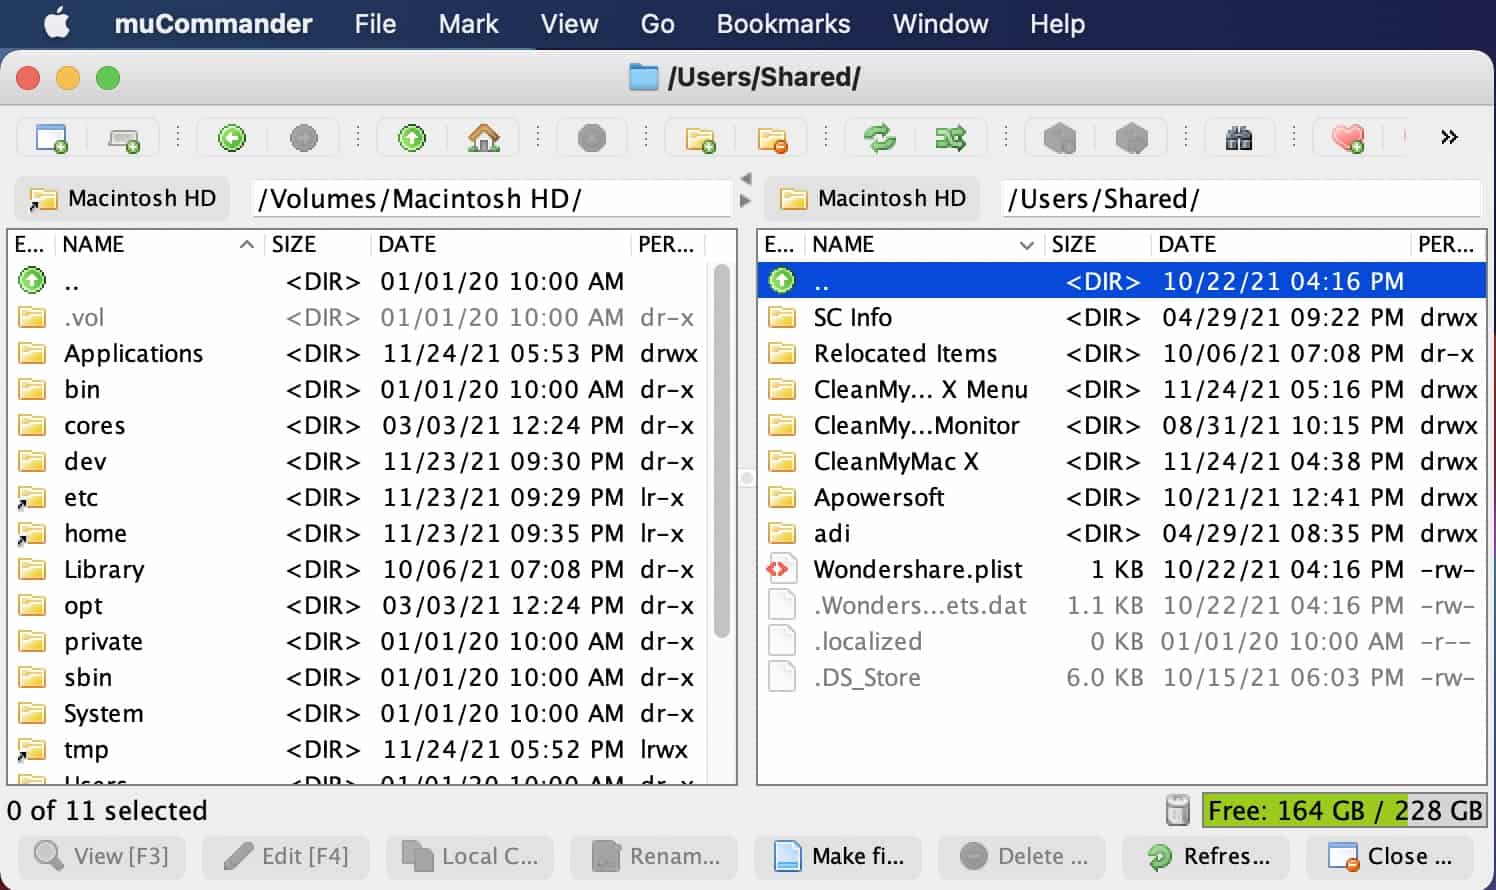 muCommander - is one of the best OS X Finder replacement